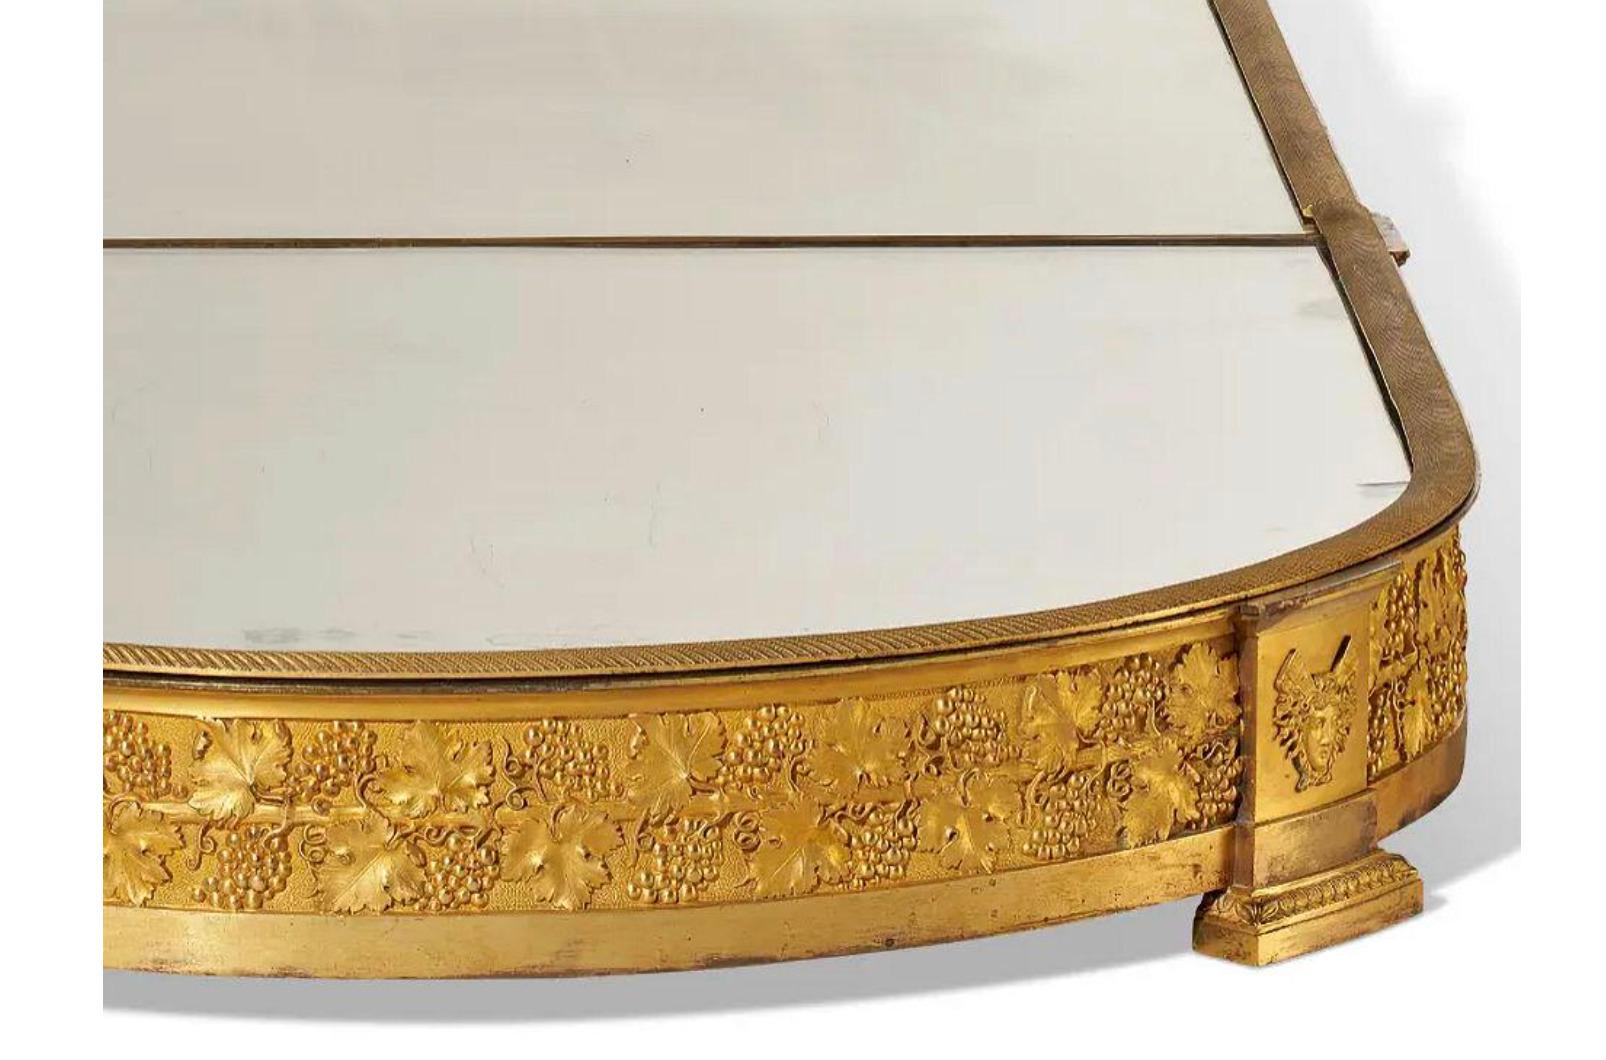 A Lavish French Empire Ormolu Surtout De Table, C. 1815, Attributed to Thomire For Sale 1